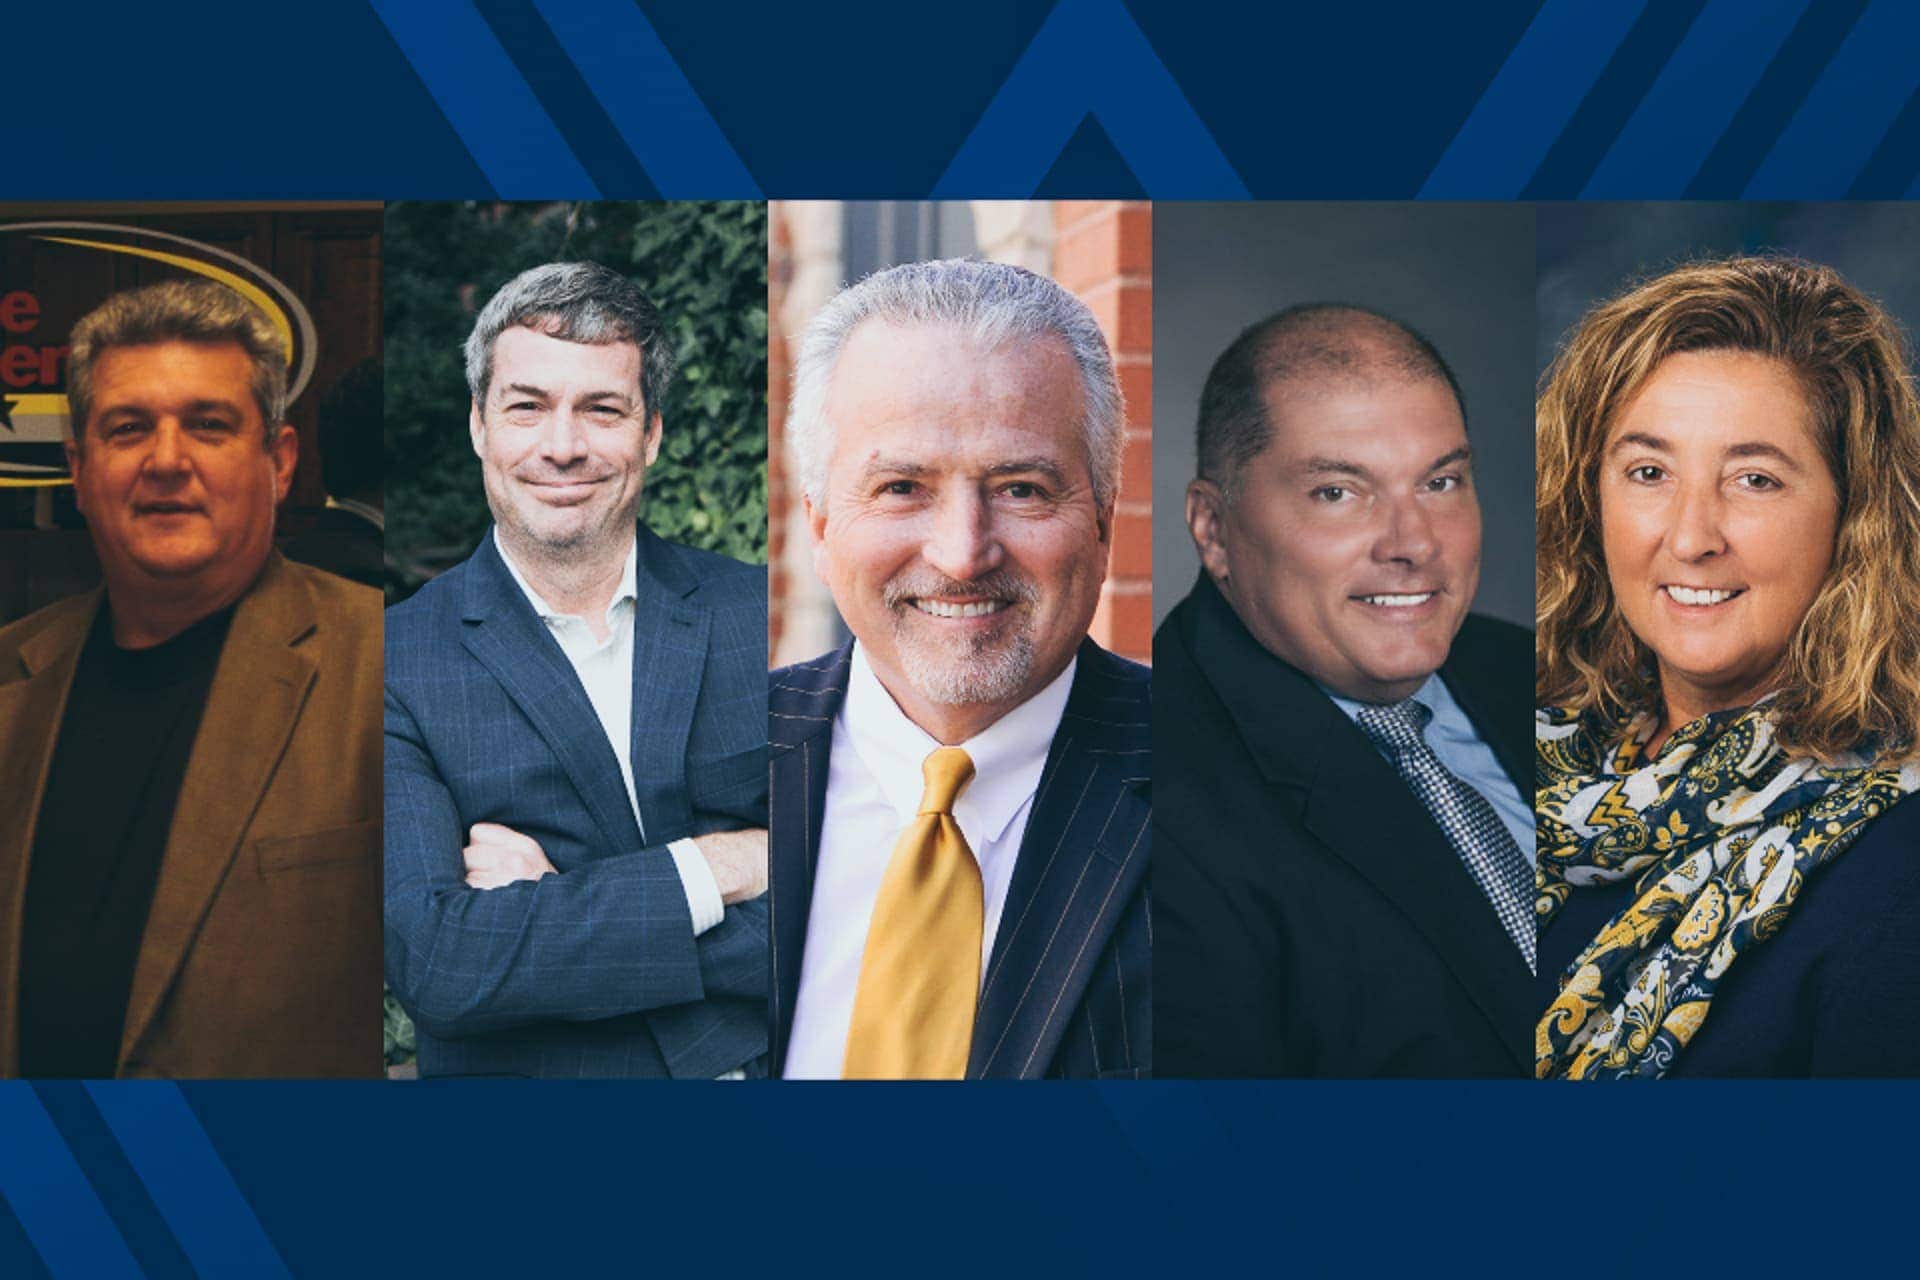 The West Virginia University Alumni Association Board of Directors has appointed Gregory Darby, Darren Feeley, Thomas Flaherty, James “Rocky” Gianola and Tracy Schoenadel to serve six-year terms on the board.